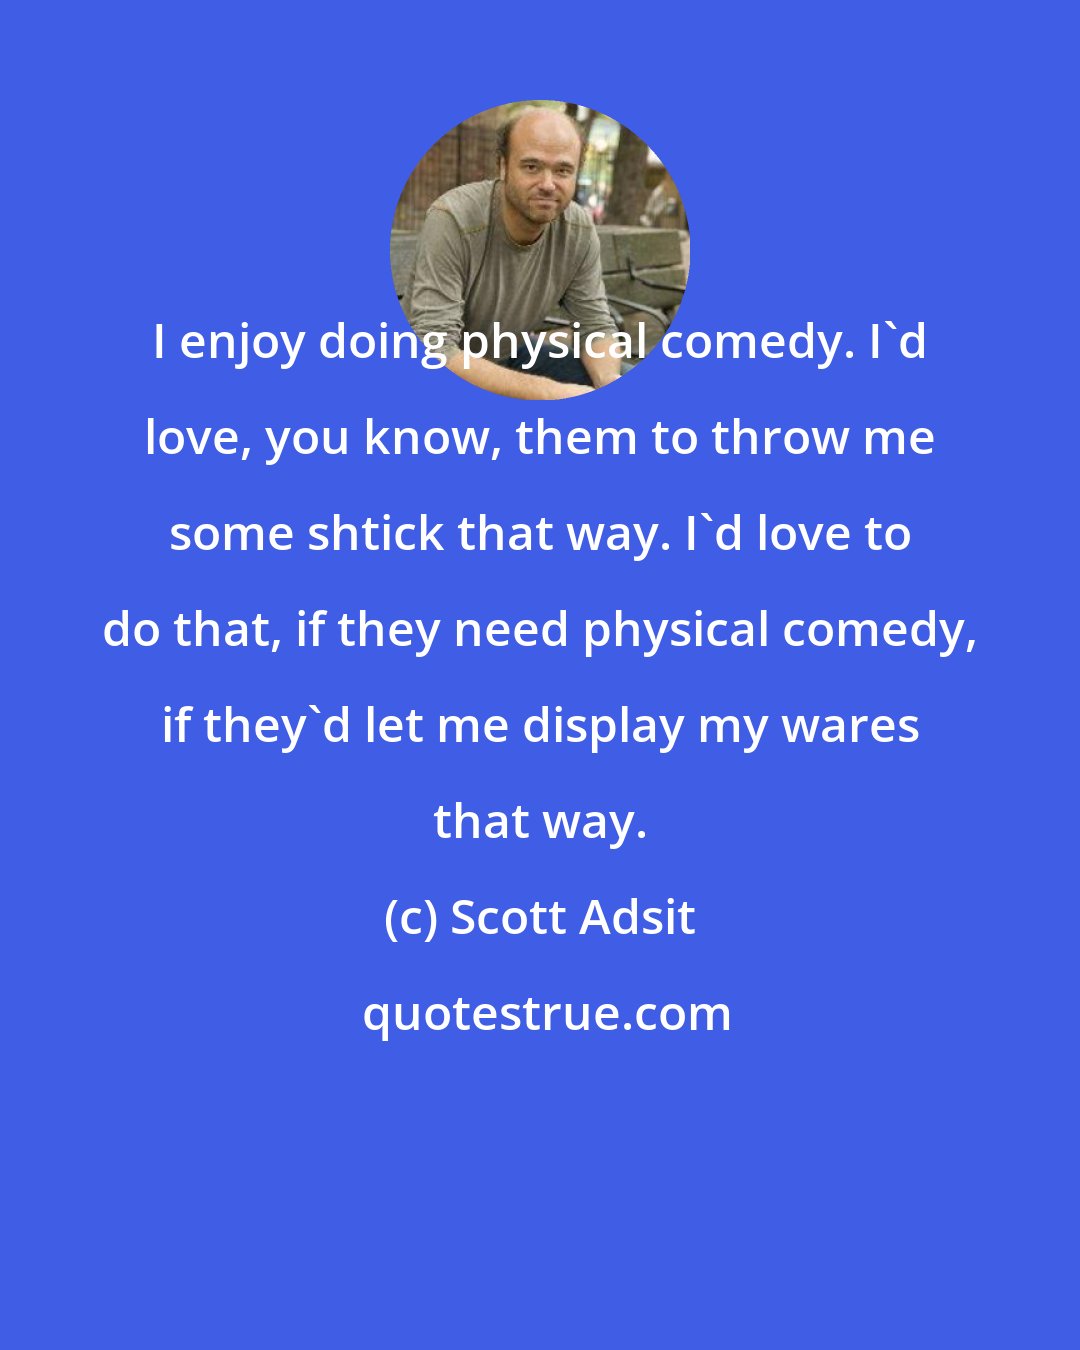 Scott Adsit: I enjoy doing physical comedy. I'd love, you know, them to throw me some shtick that way. I'd love to do that, if they need physical comedy, if they'd let me display my wares that way.